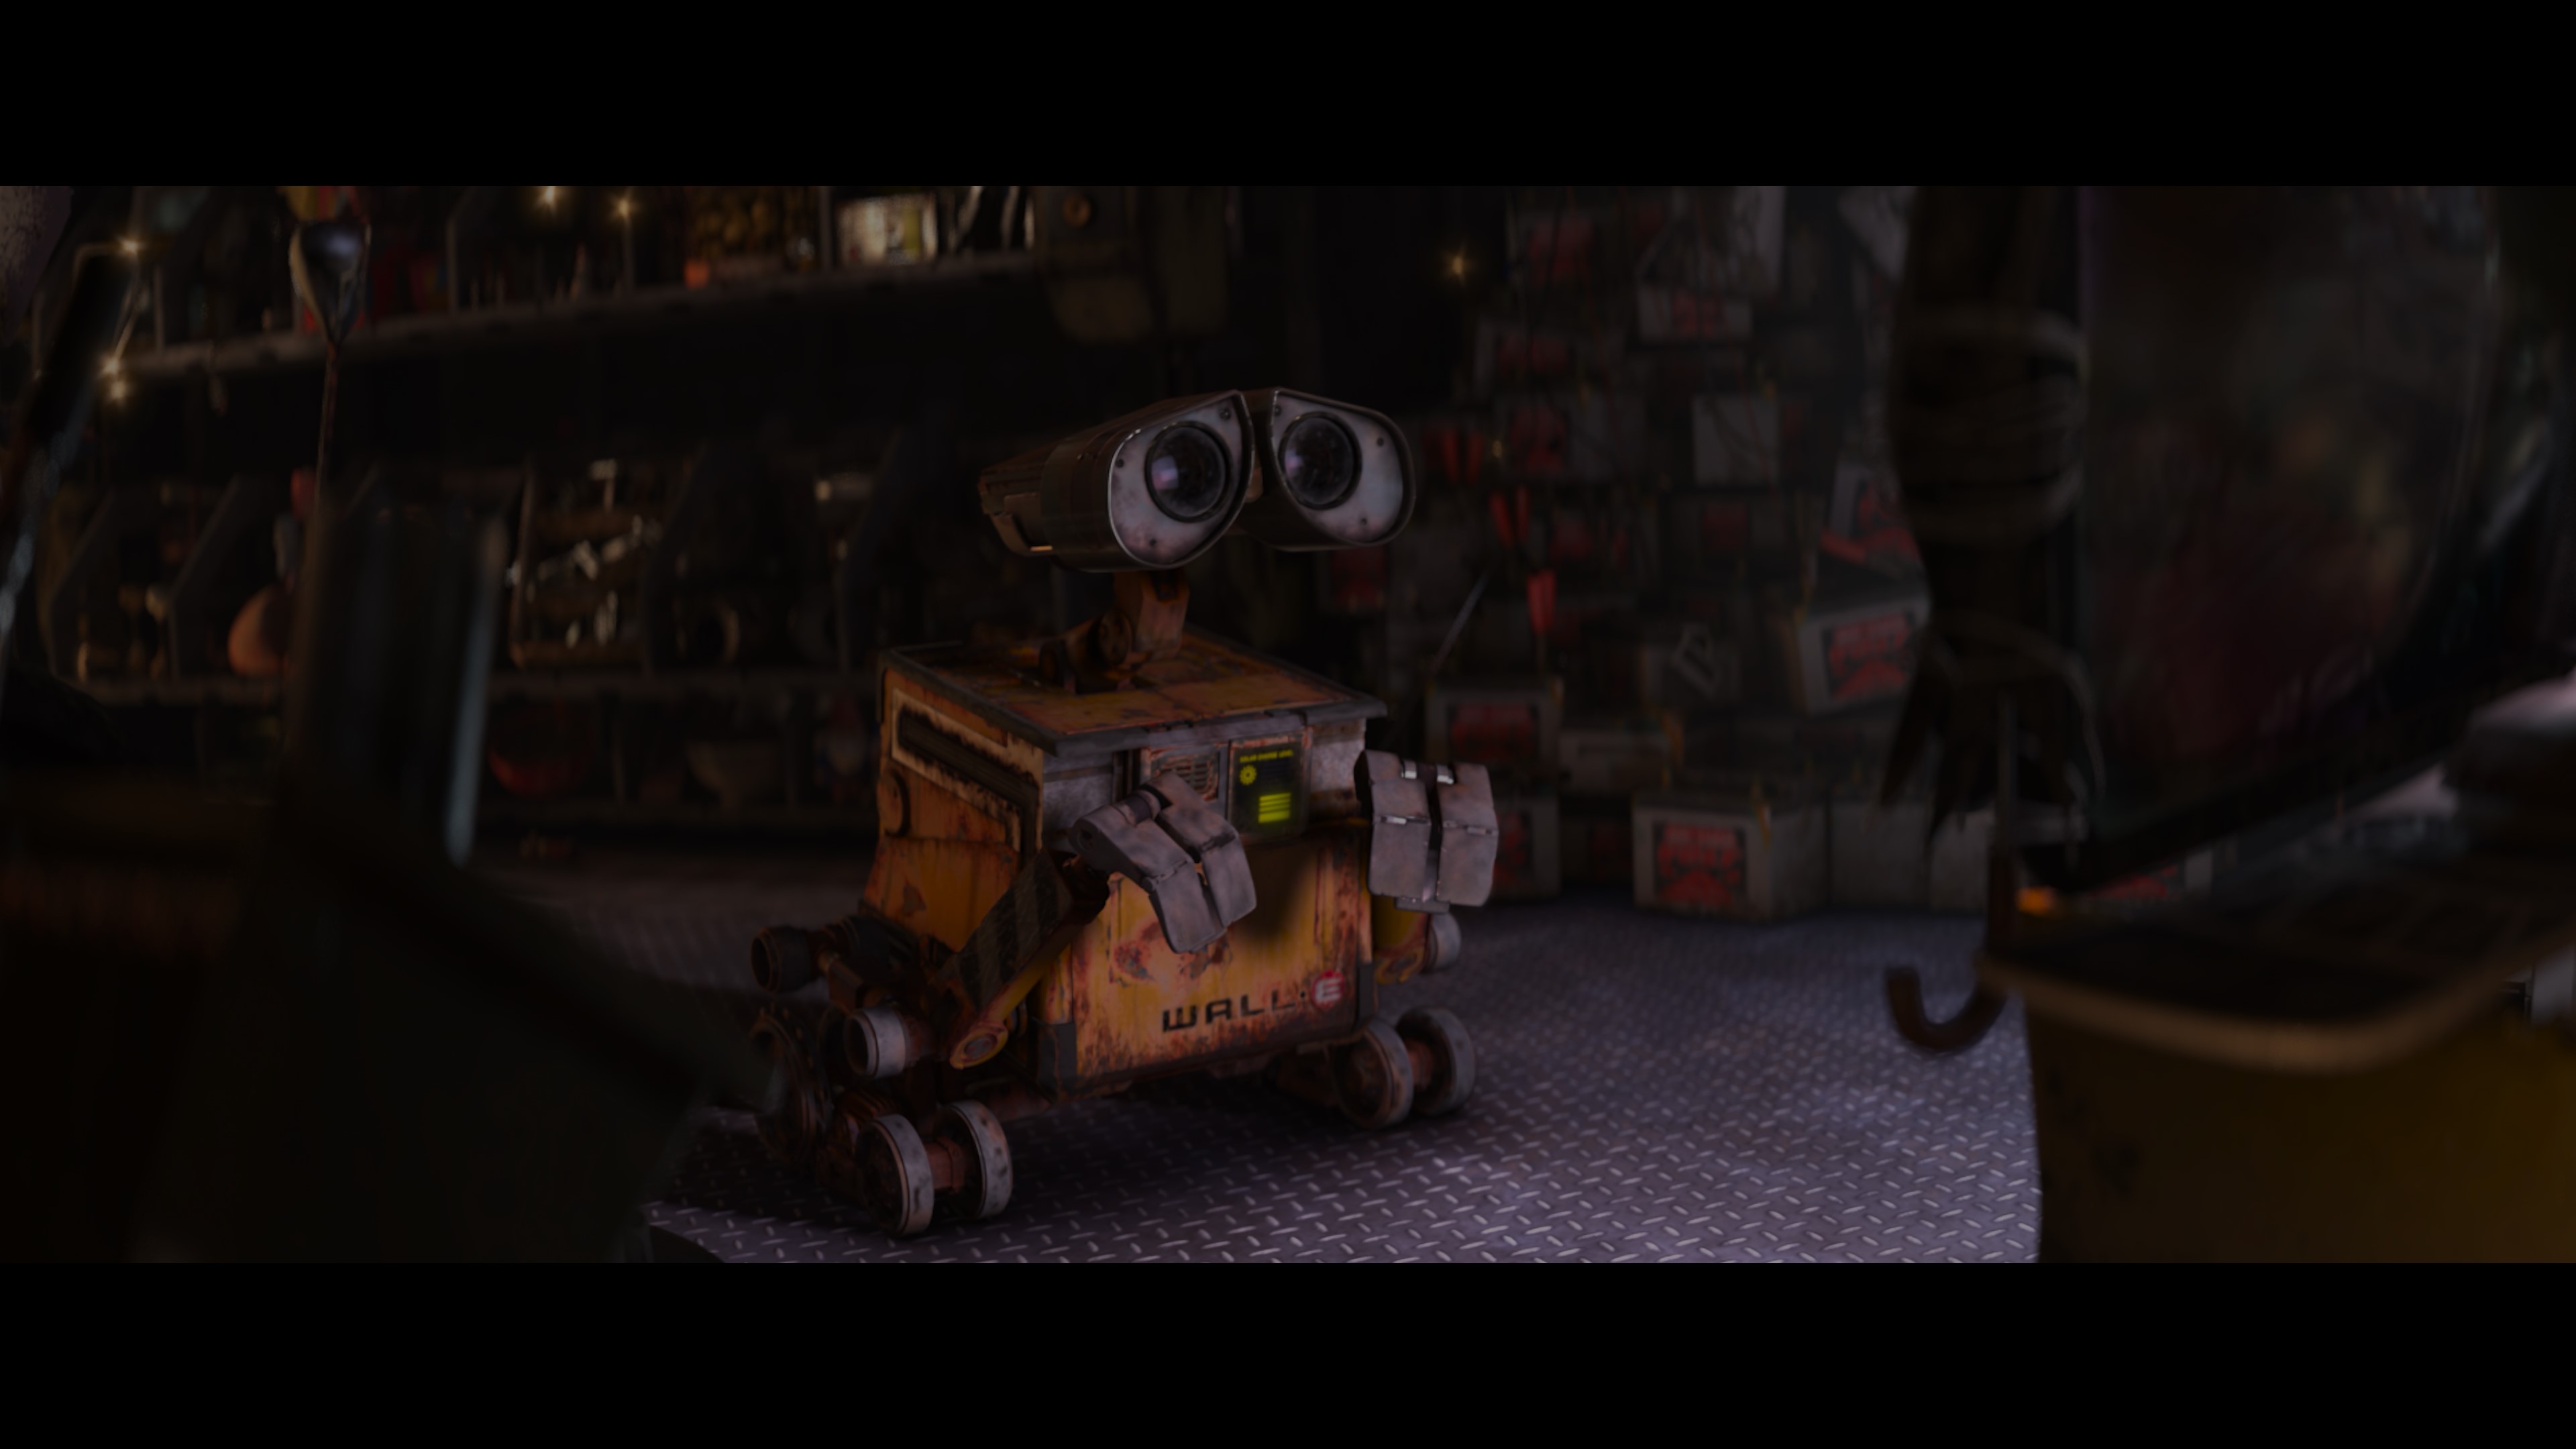 WALL-E: The Criterion Collection's first Pixar movie essentially invented  the iPad.